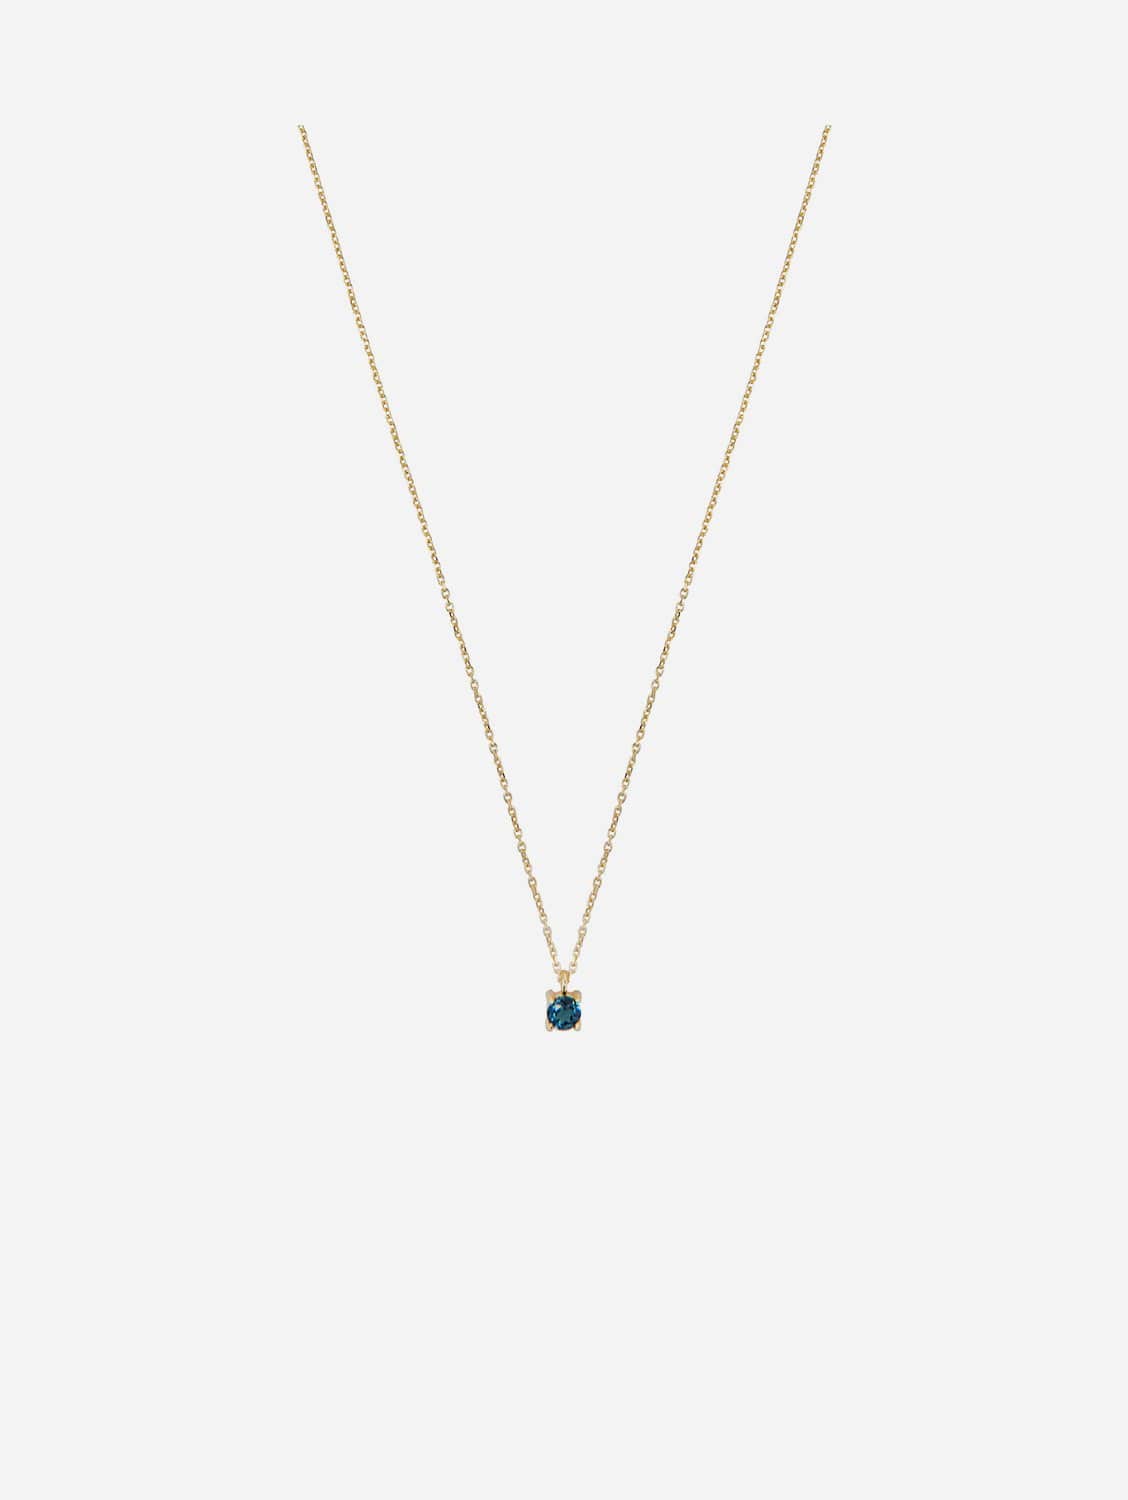 Ana Dyla Niamh Recycled 925 Sterling Silver London Topaz Necklace | Gold Vermeil